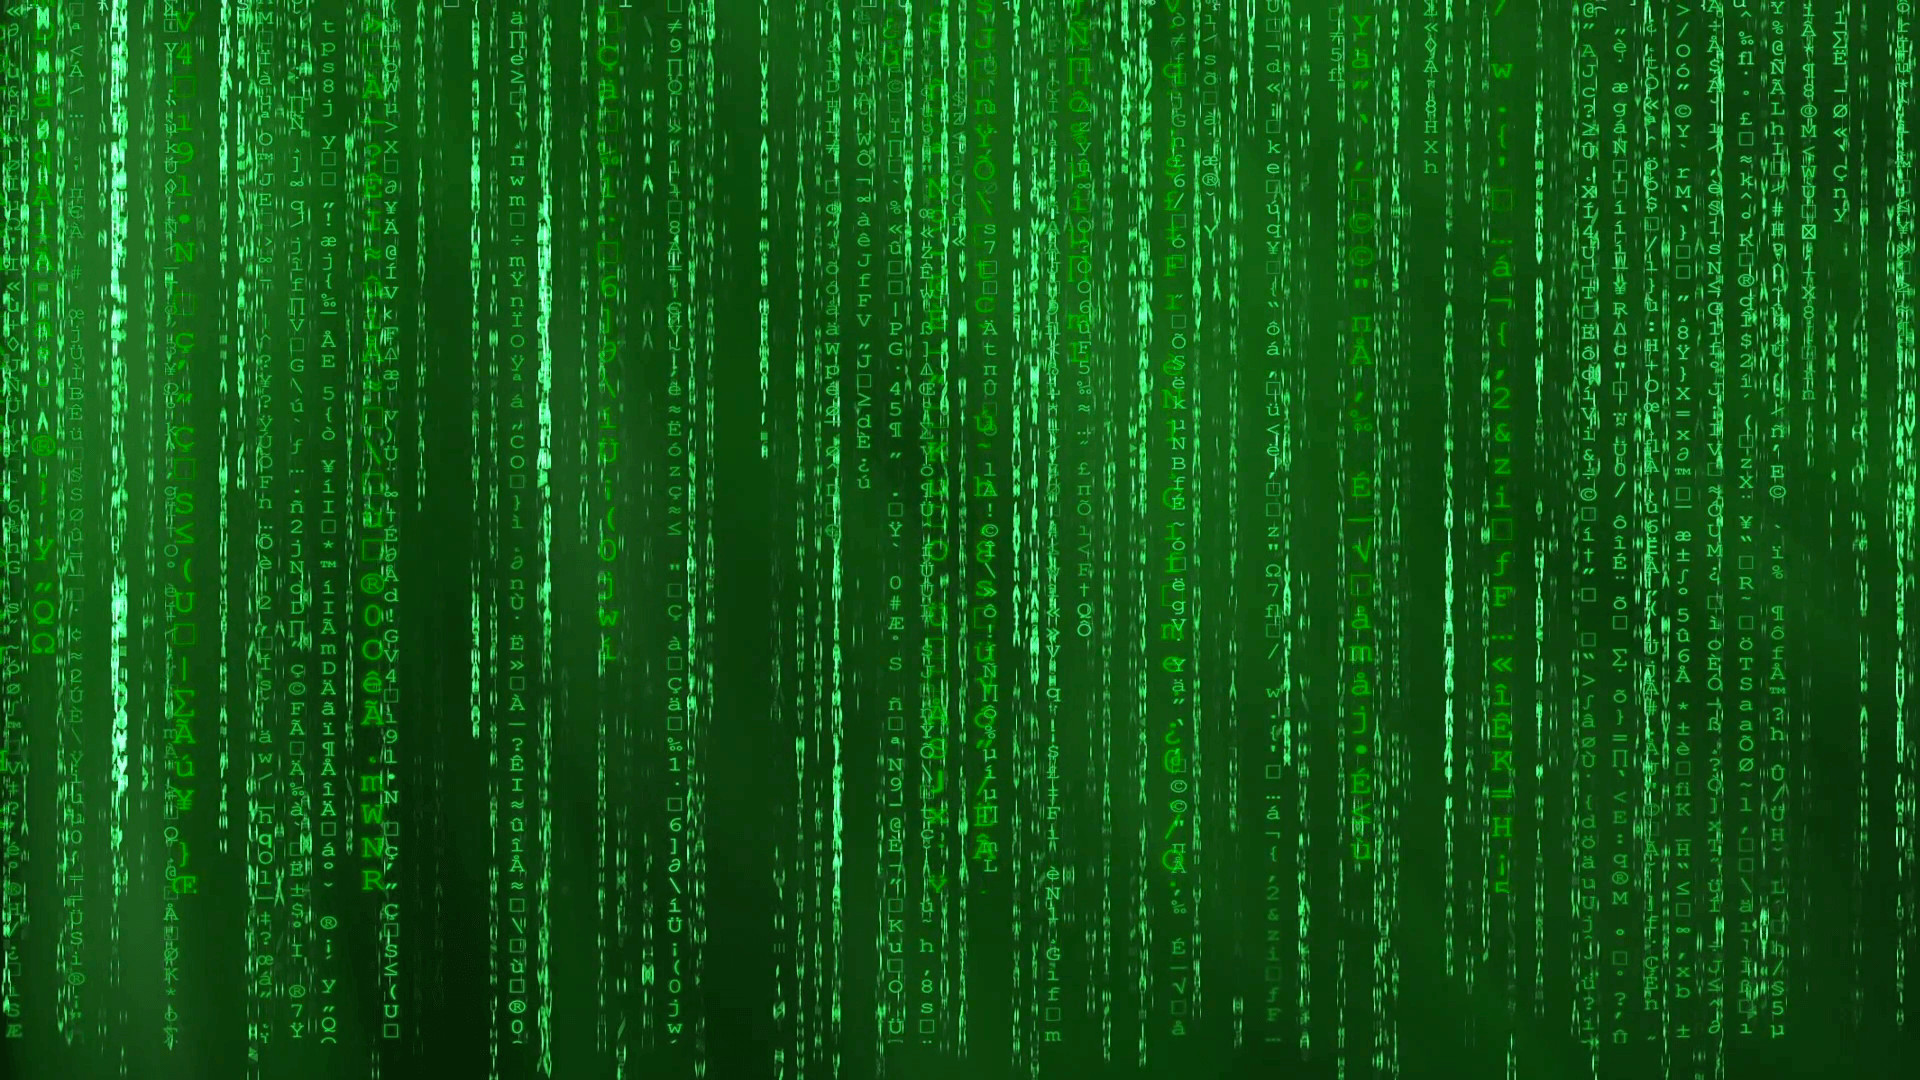 1920x1080 Green animated matrix background, computer code with symbols and .